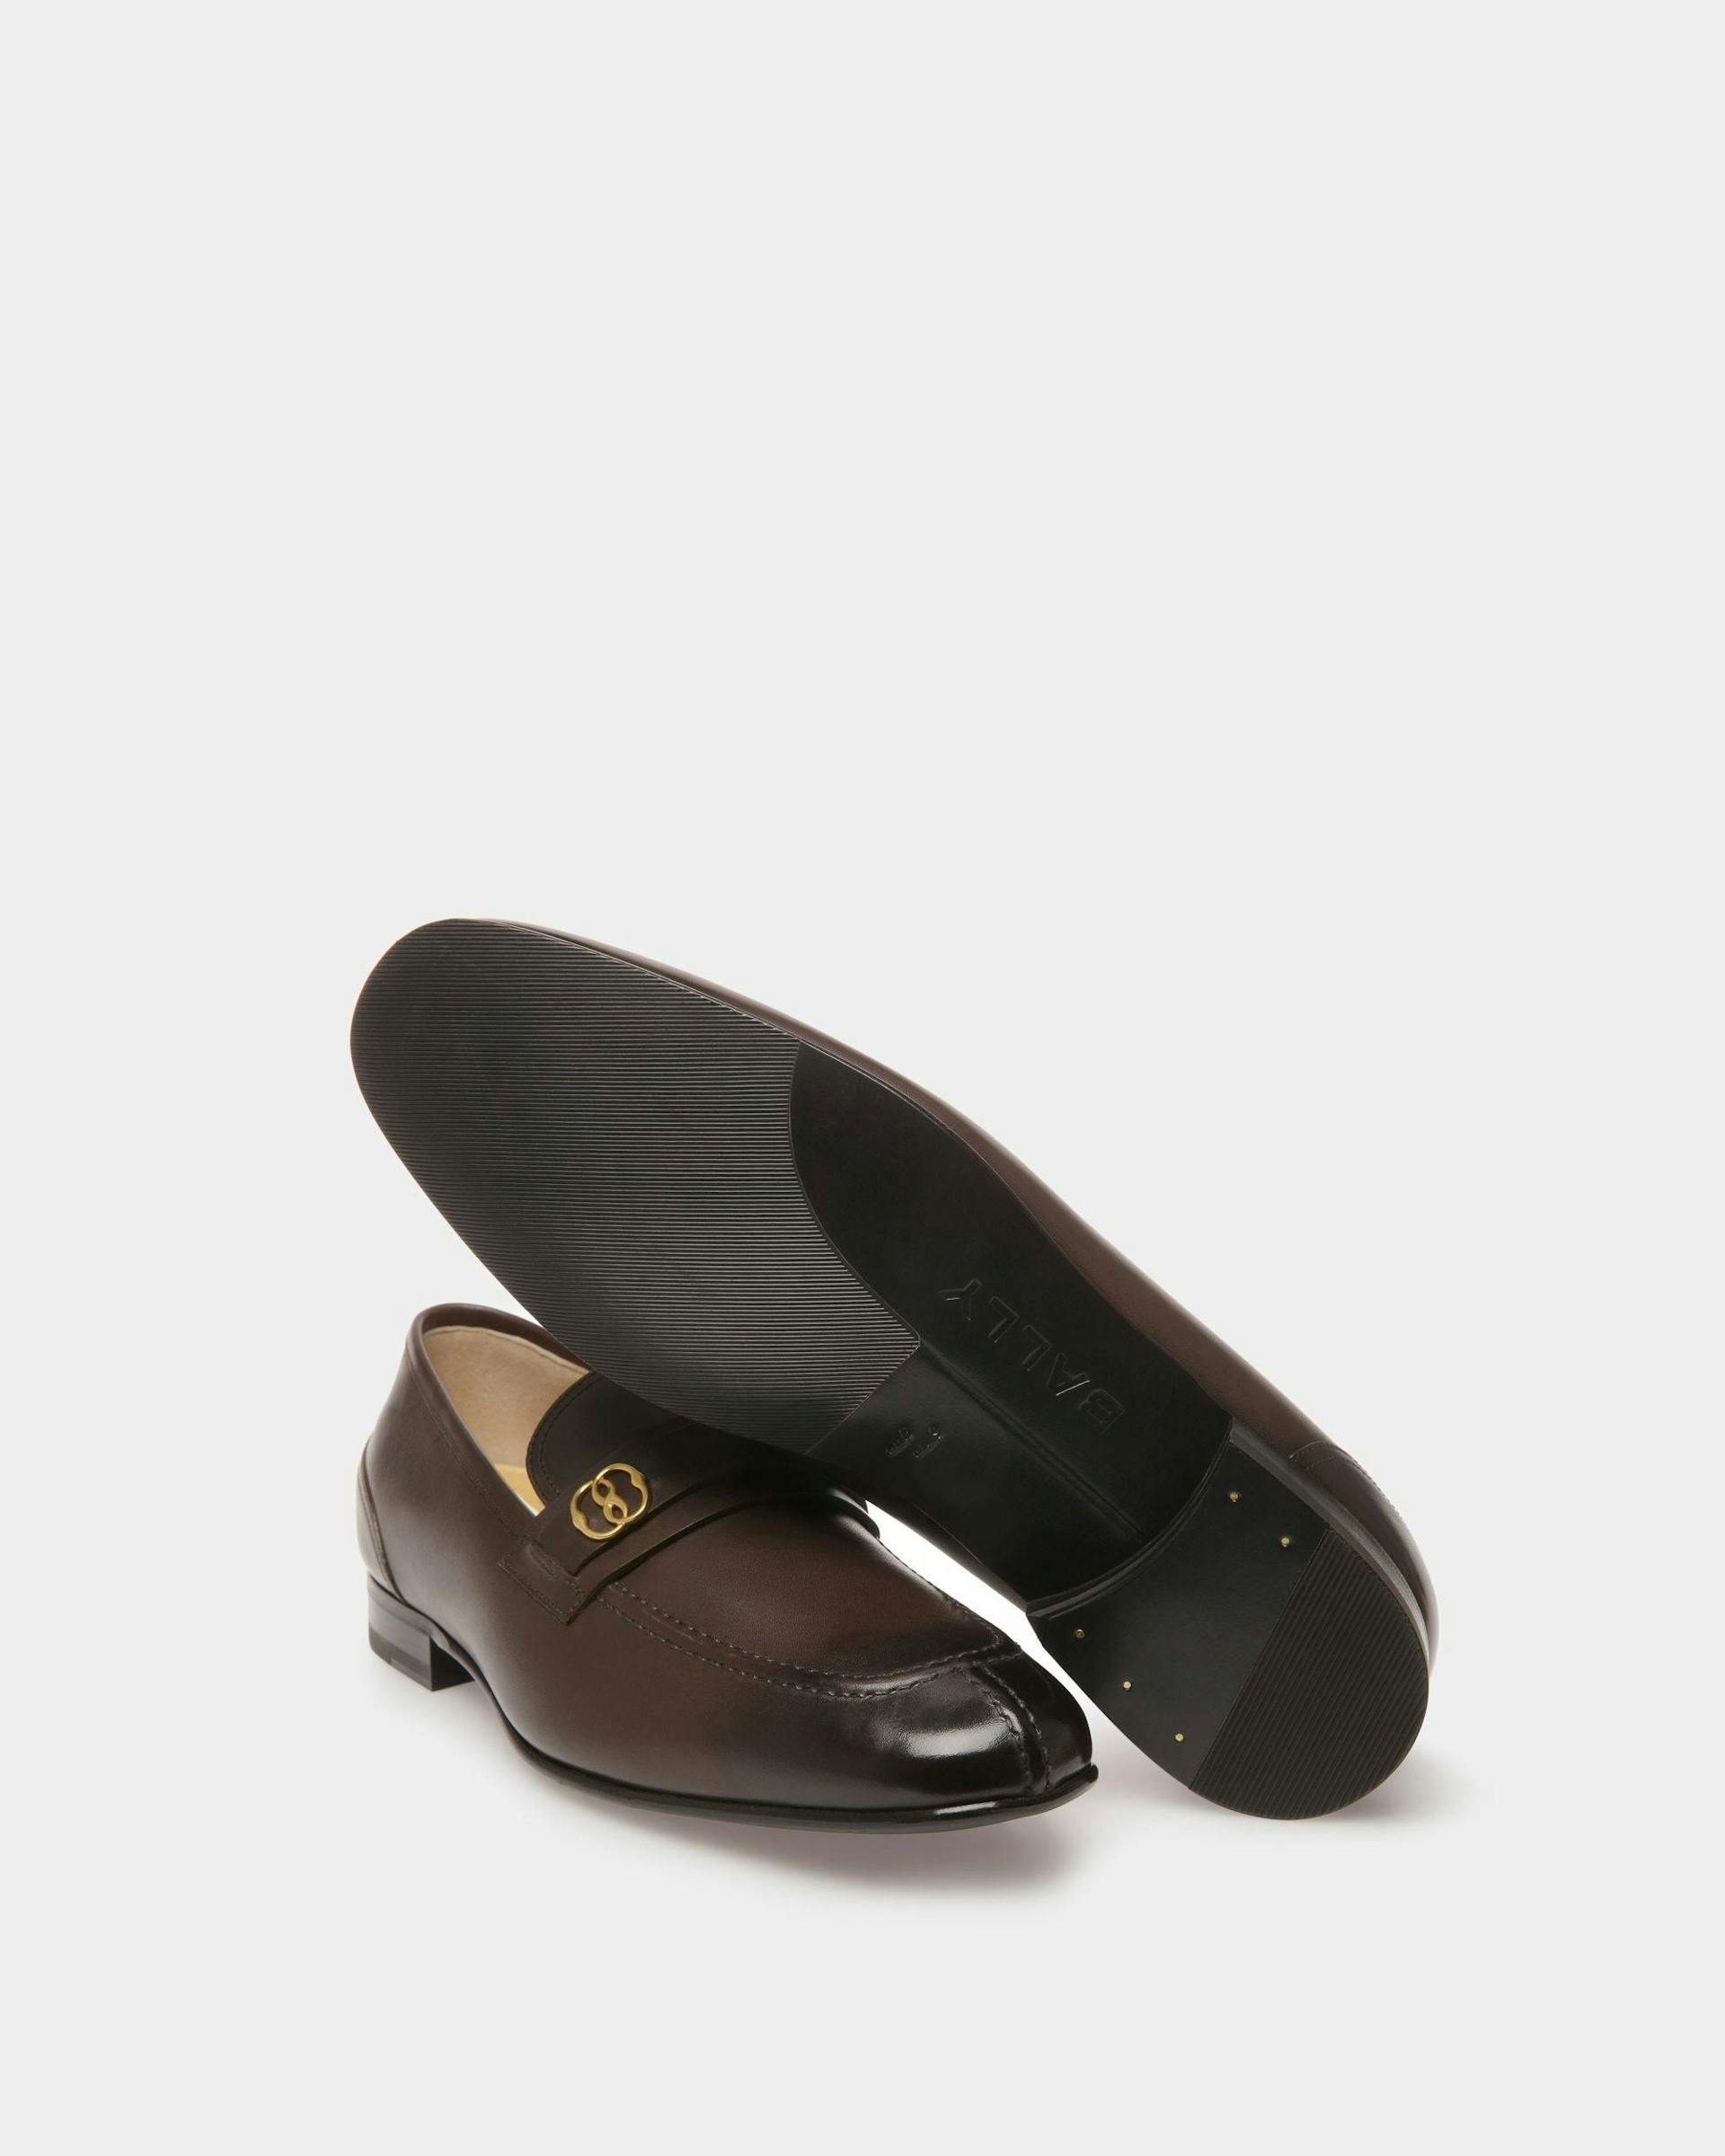 Men's Suisse Loafers In Brown Leather | Bally | Still Life Below